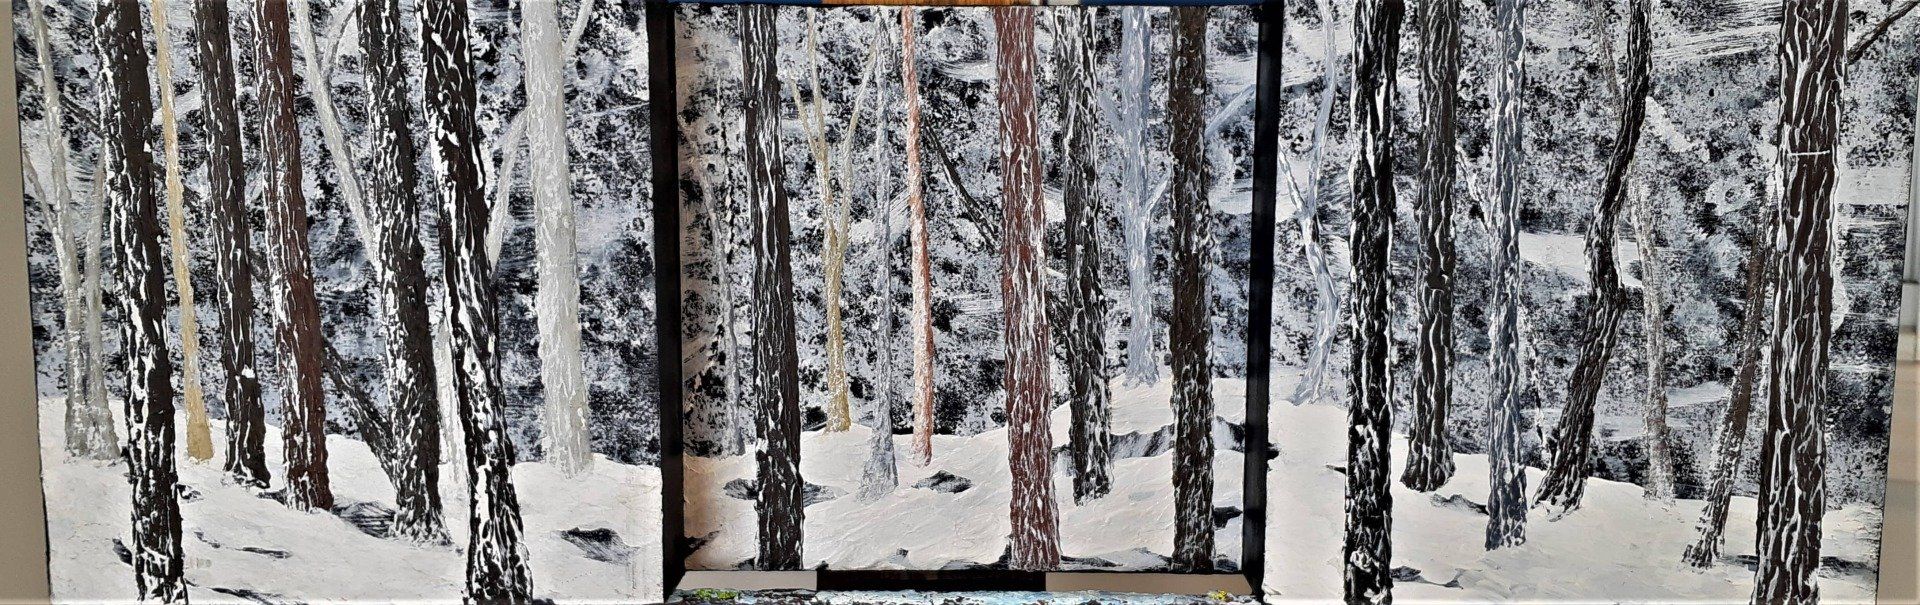 Majestic (9) is a triptych acrylic on wood board 24 in. x 8 in. The signature winter forest with a bed of snow and a back ground of white wash over black gesso. The middle canvas is slightly recessed to give a sense of depth. This piece is available.